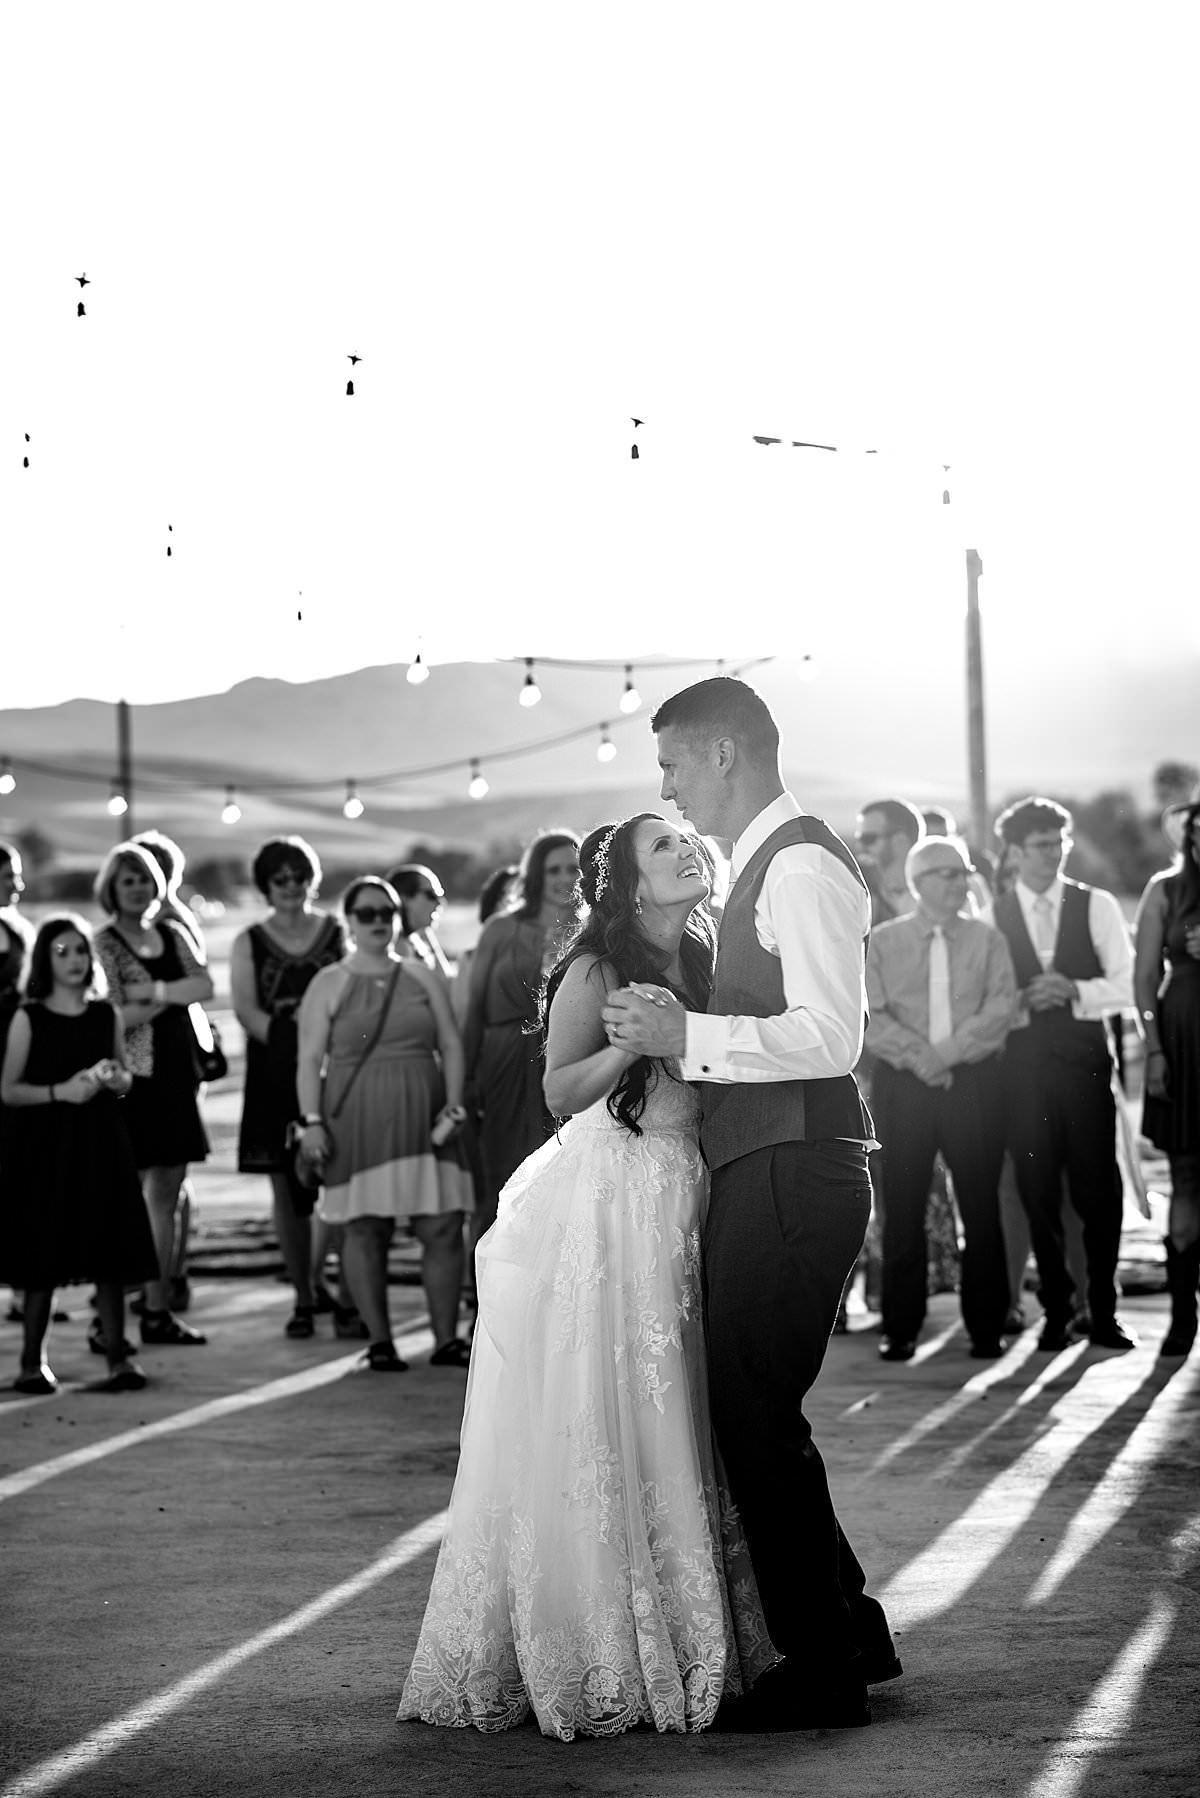 Romantic black and white photo of couple dancing their first dance